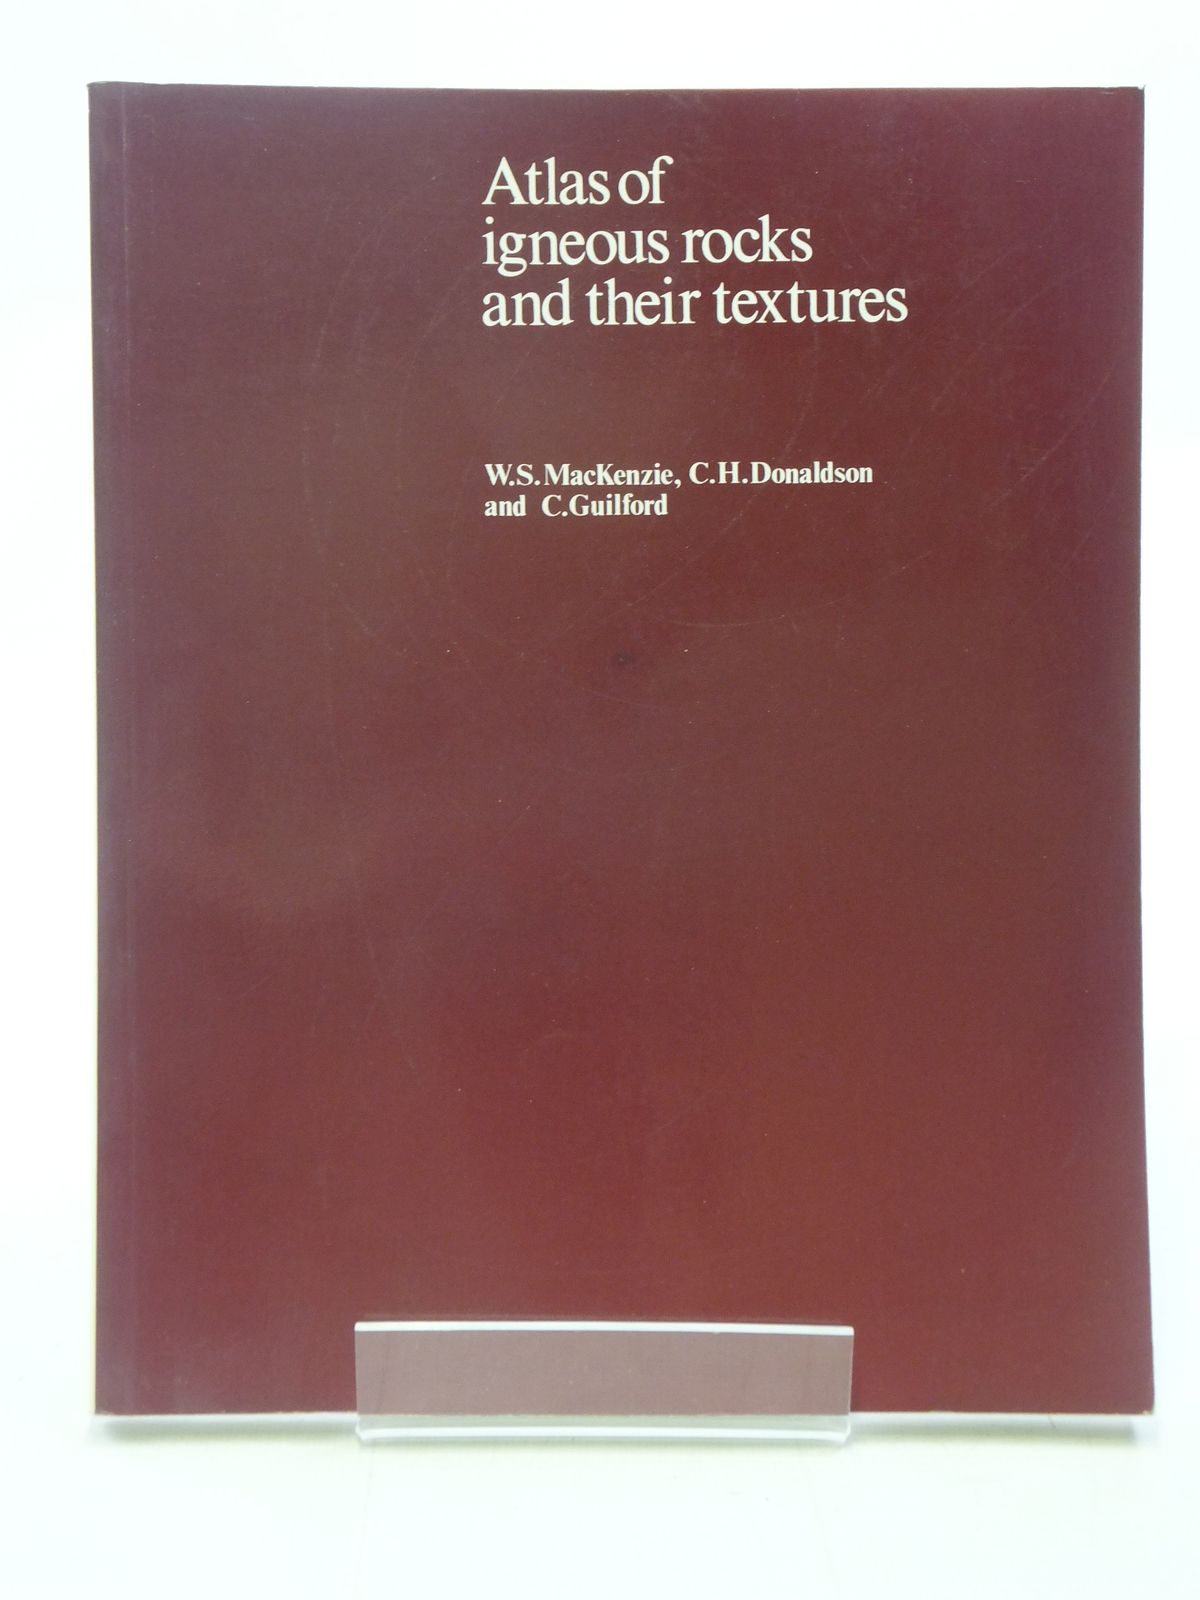 Stella & Rose's Books : ATLAS OF IGNEOUS ROCKS AND THEIR TEXTURES 